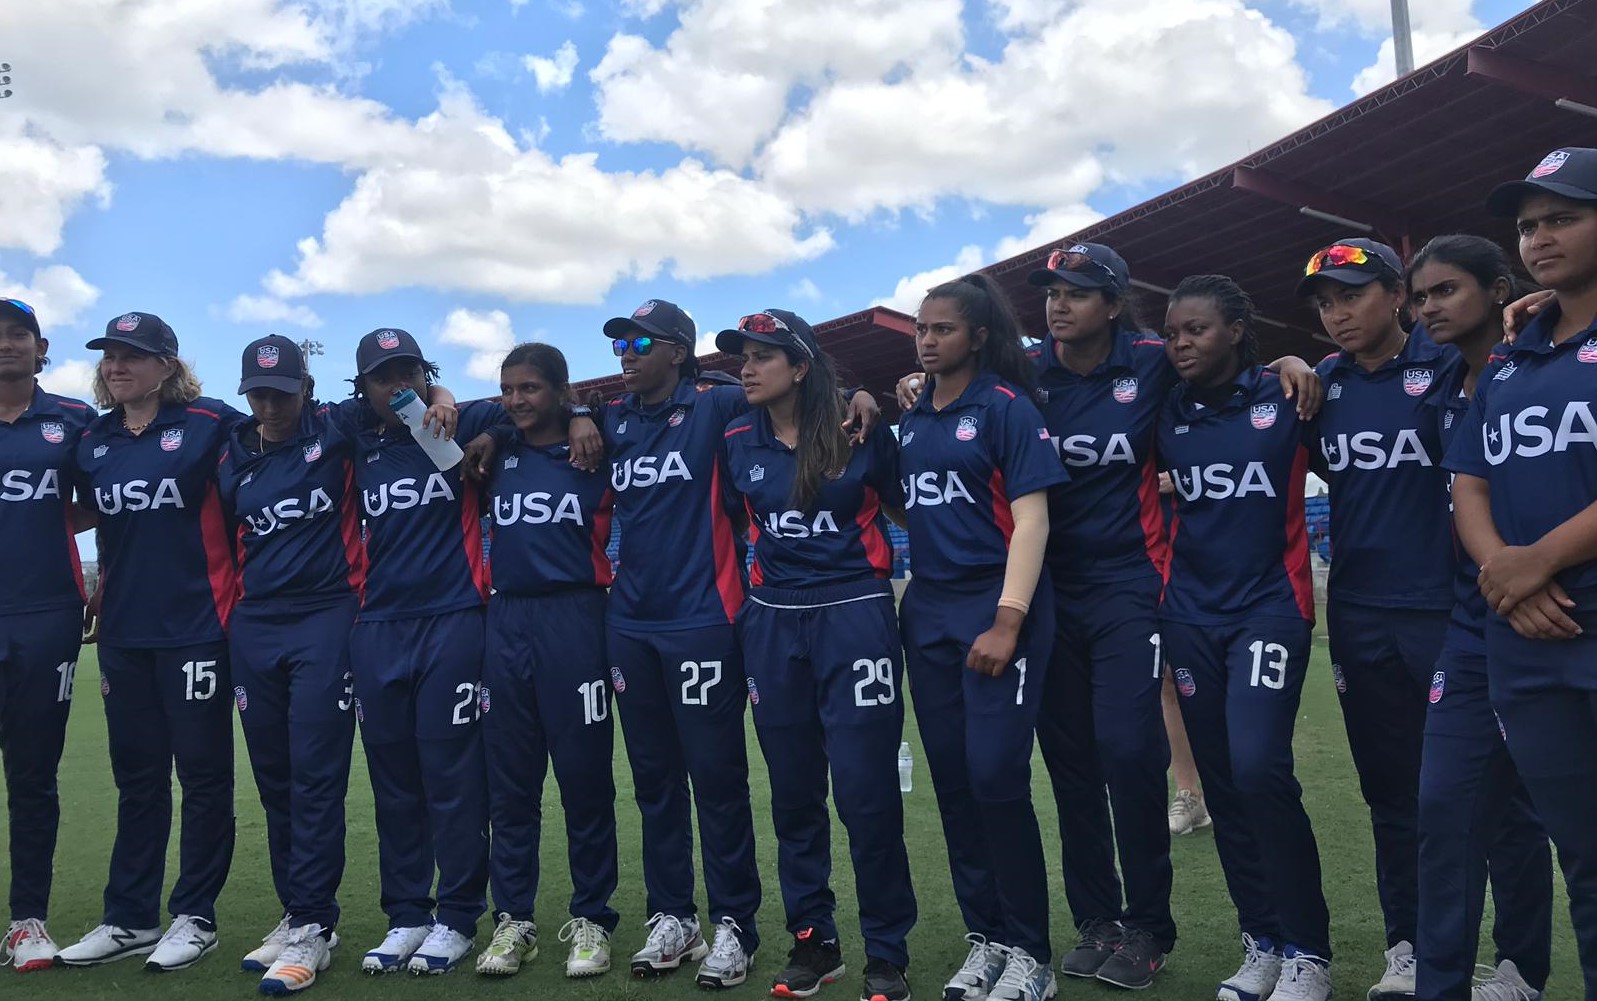 Team USA Women off to perfect start with 10 wicket win over Canada